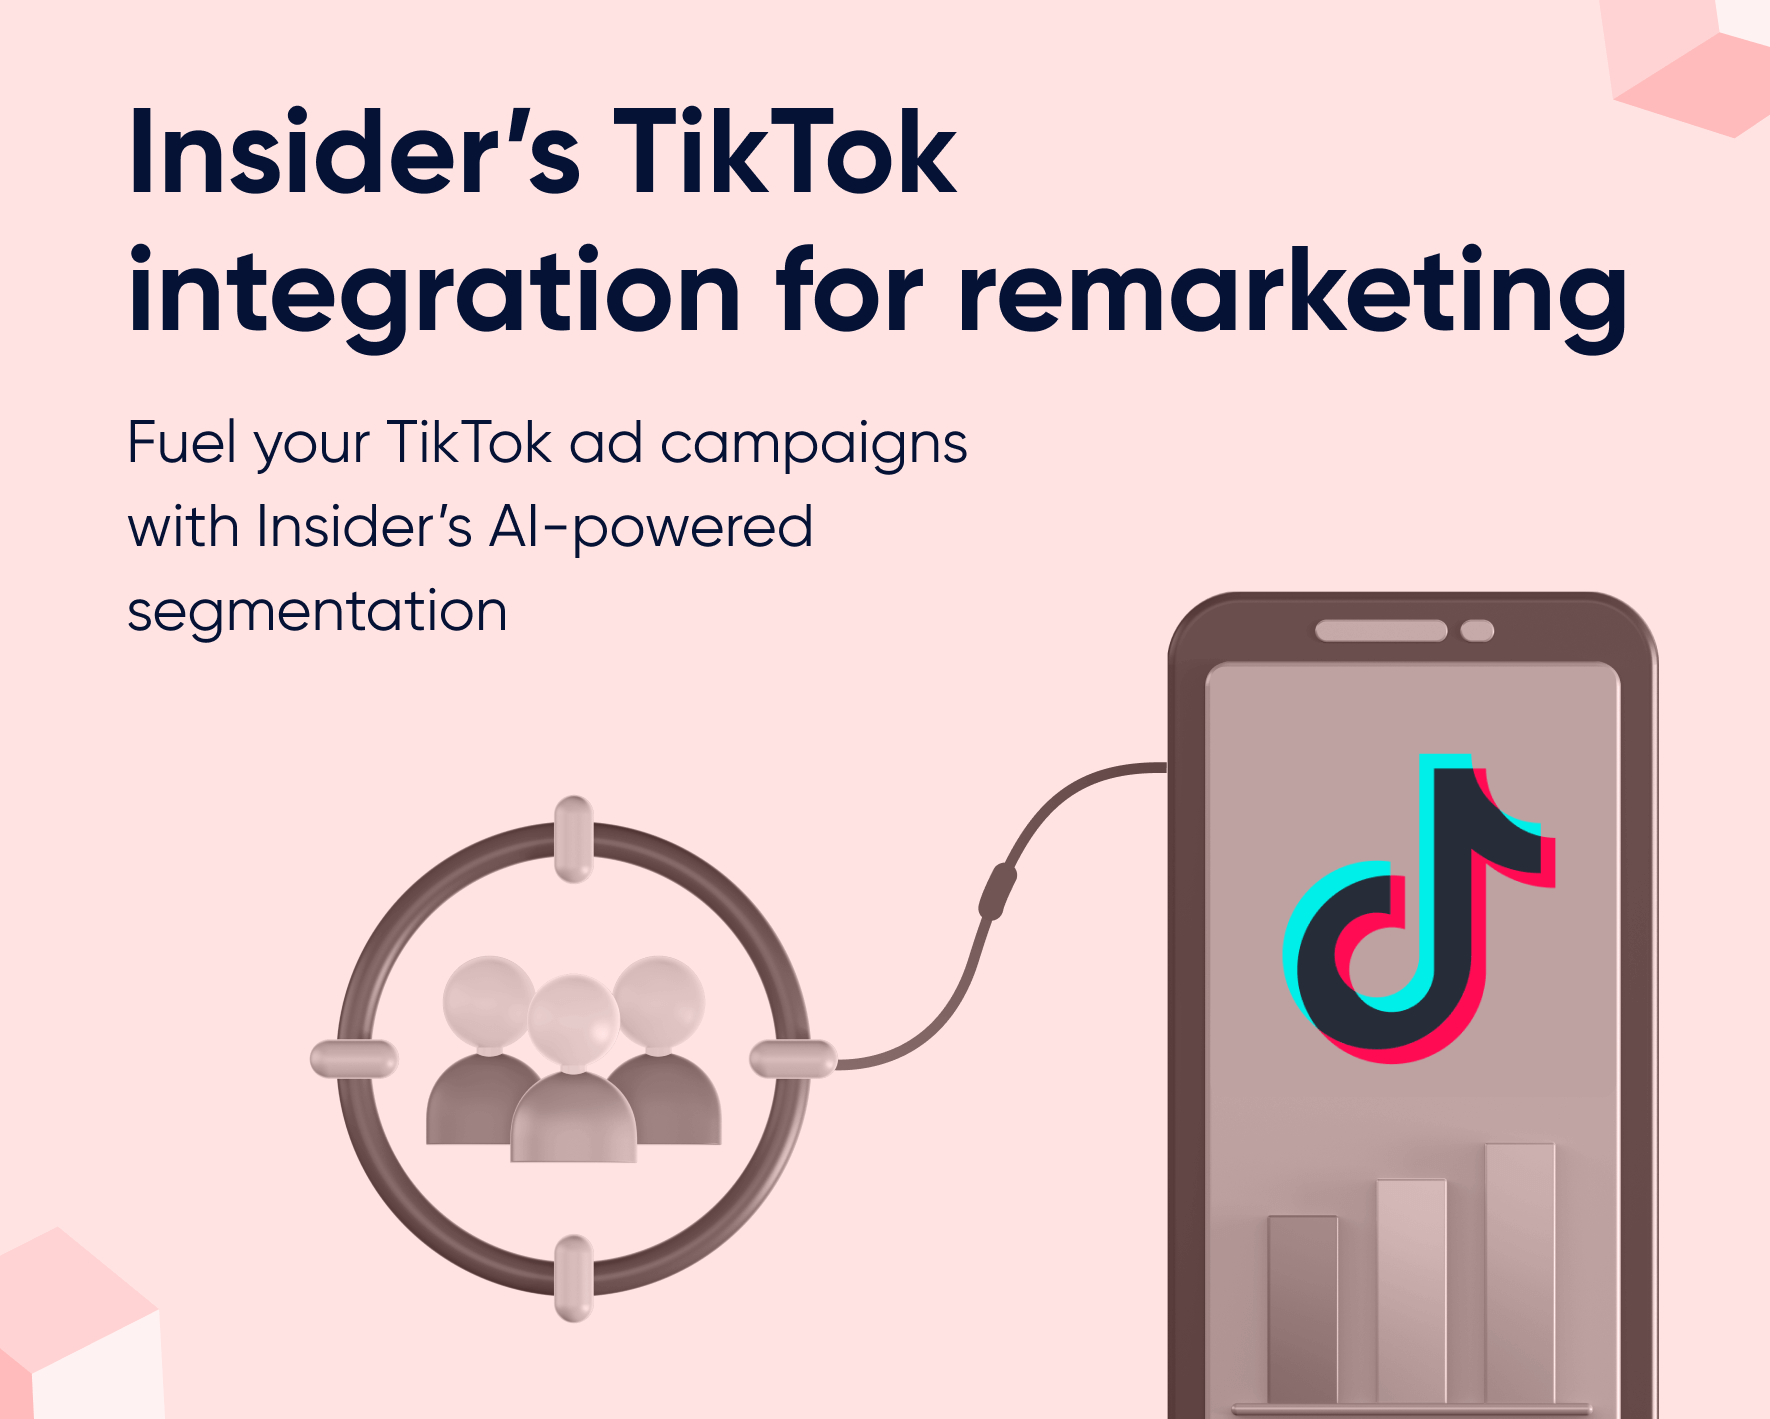 Insider’s TikTok integration for remarketing: Paving the way for the future of social media Featured Image